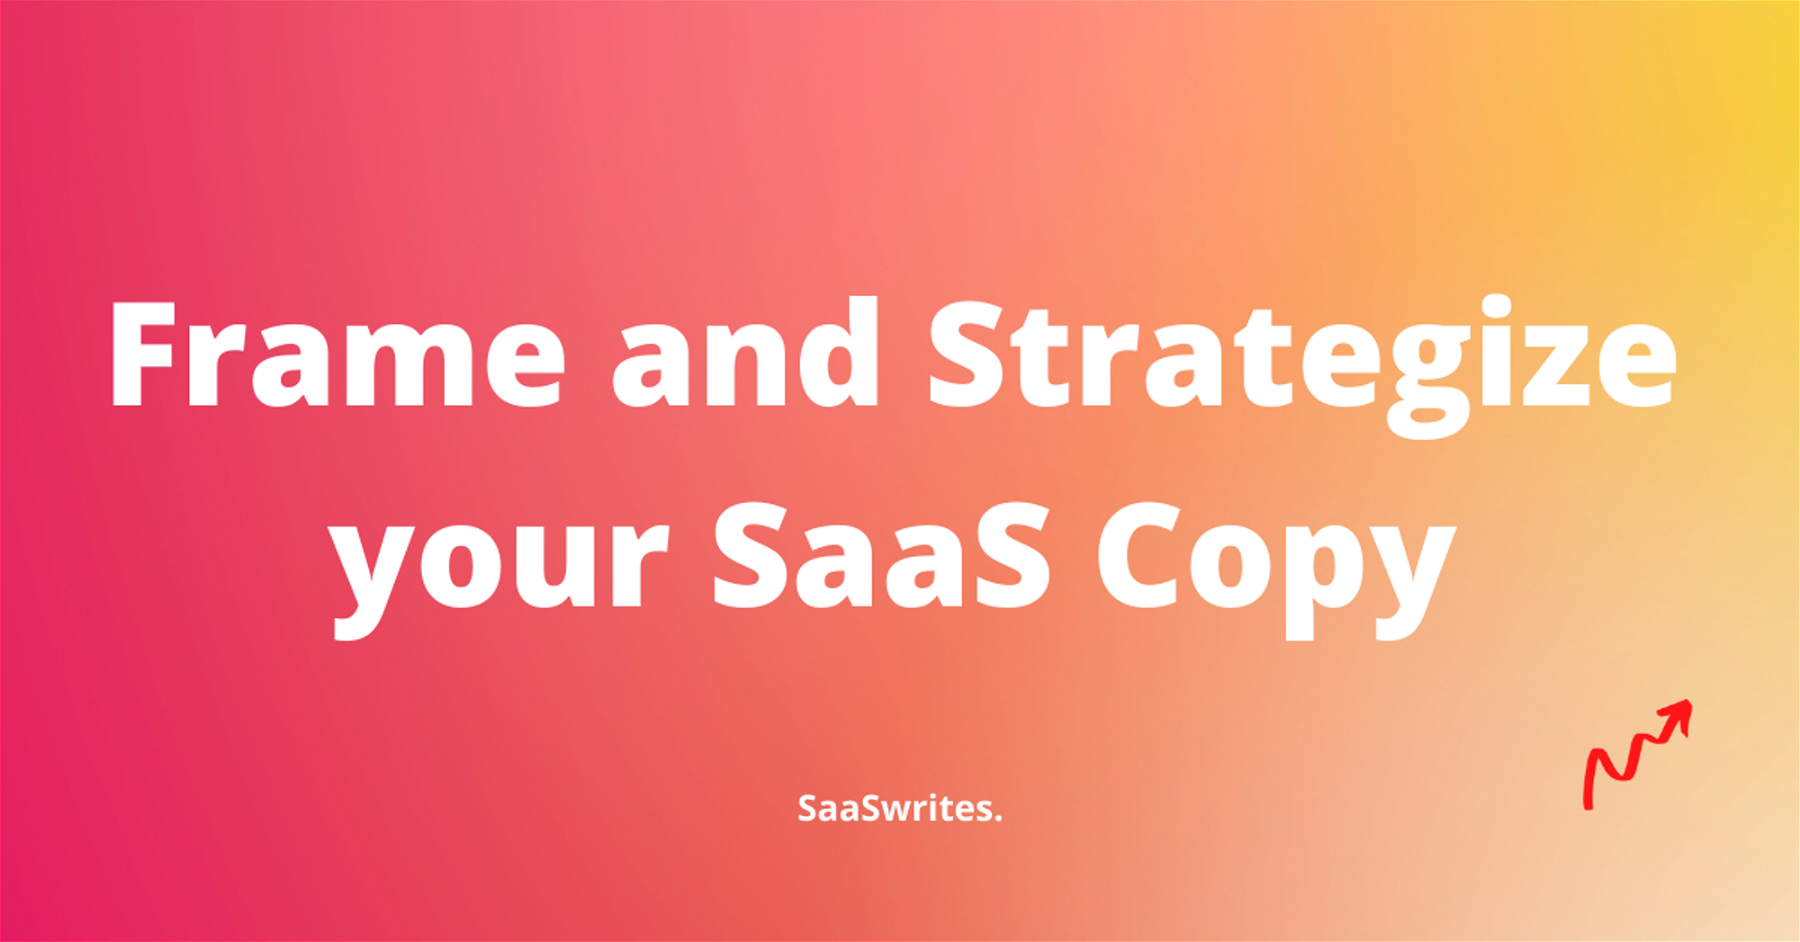 15 Ways to Frame and Strategize your SaaS copy